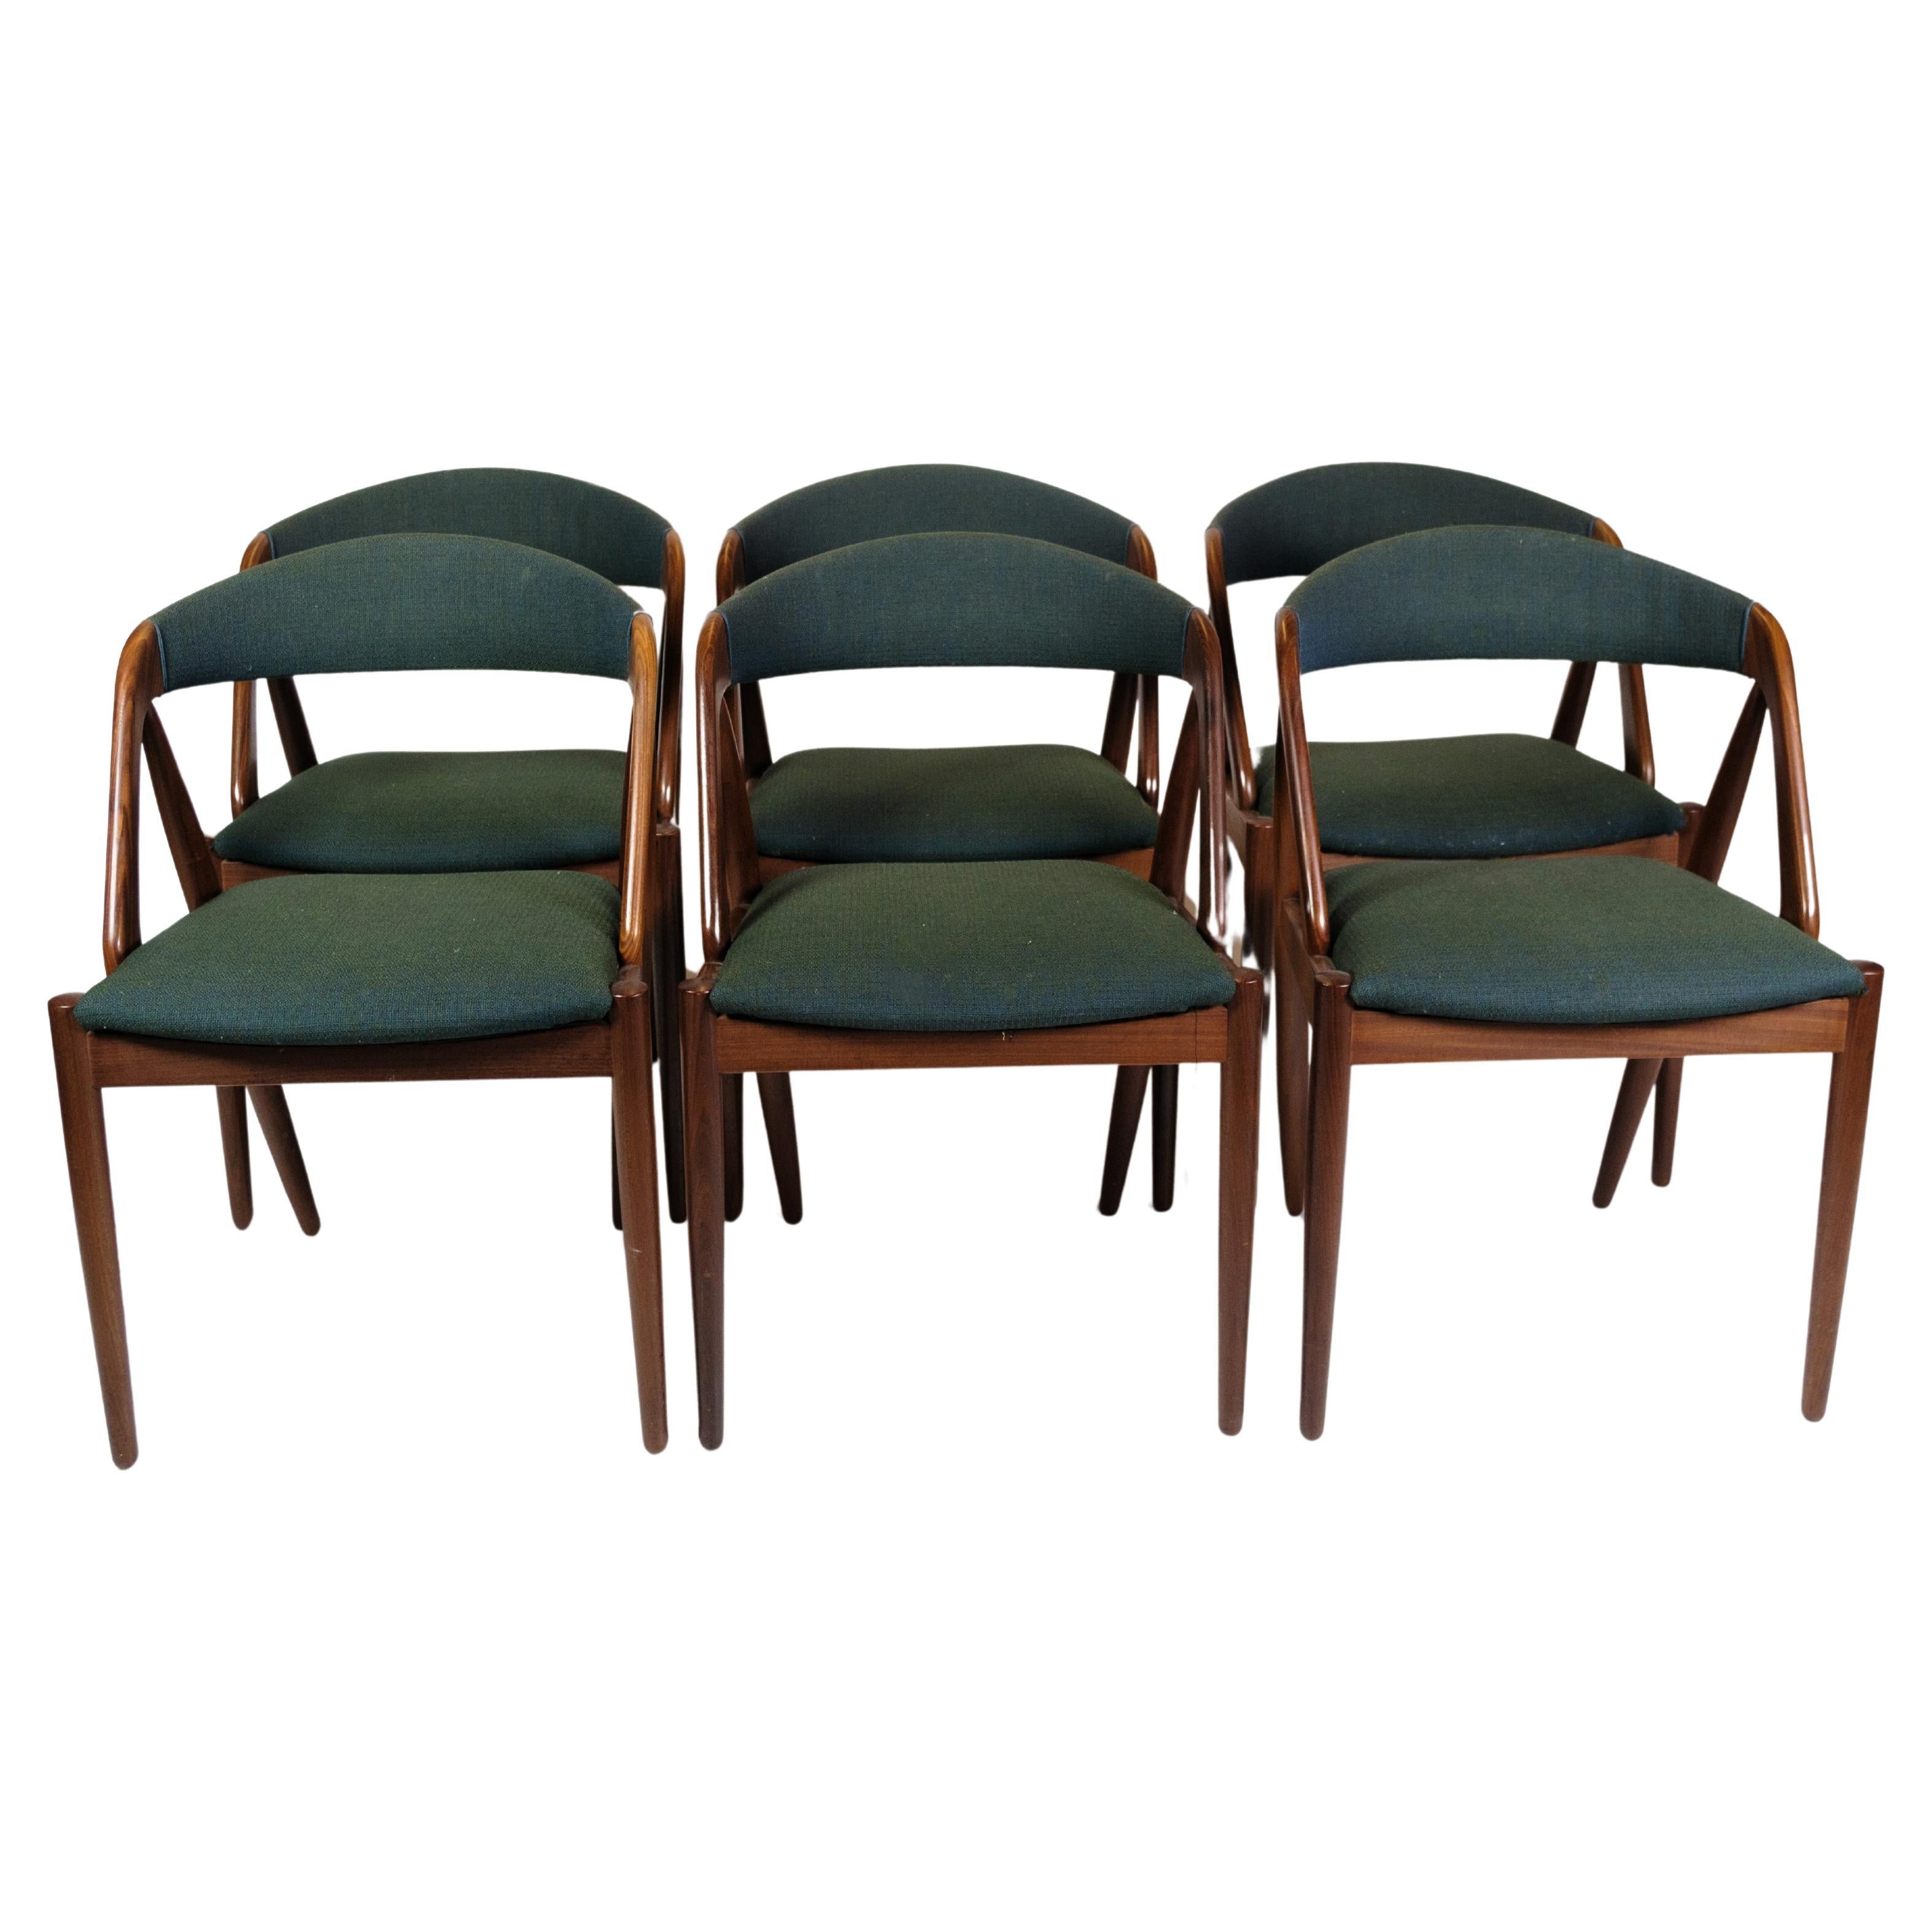 Set Of 6 Dining Room Chairs Model 31 Made In Teak By Kai Kristiansen From 1950